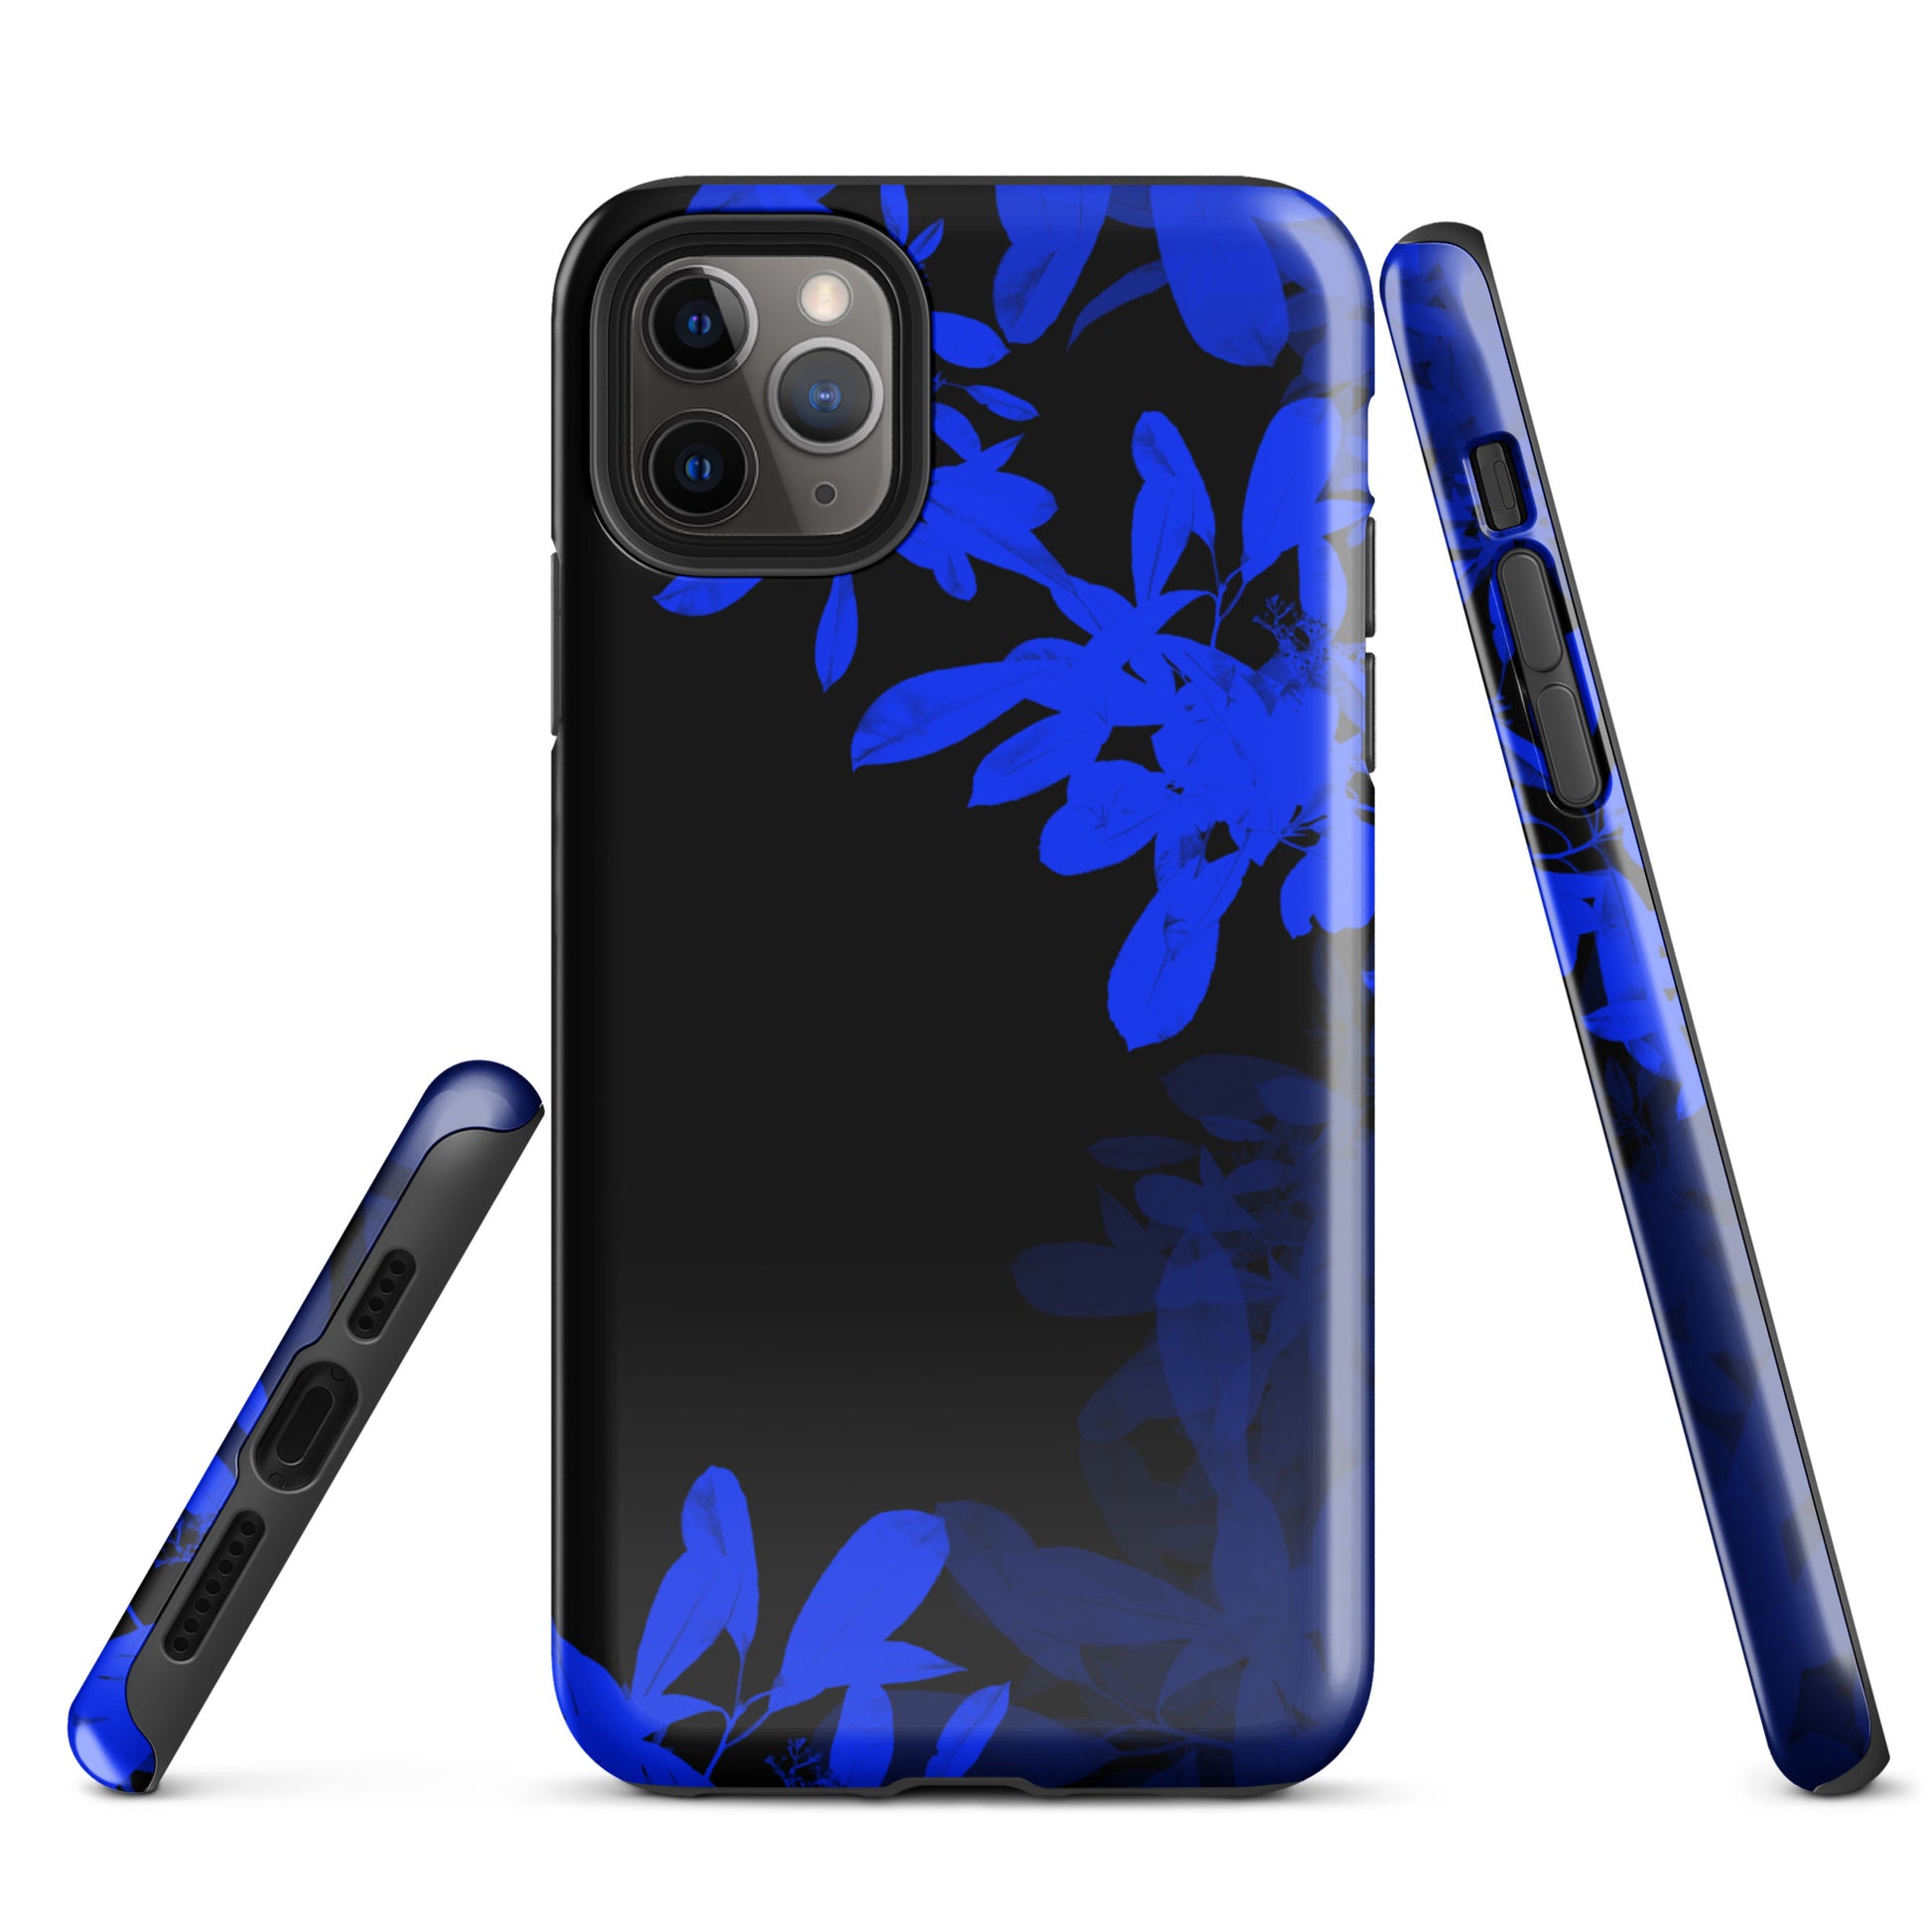 A Night Blue Plant Case for the iPhone 11 Pro Max